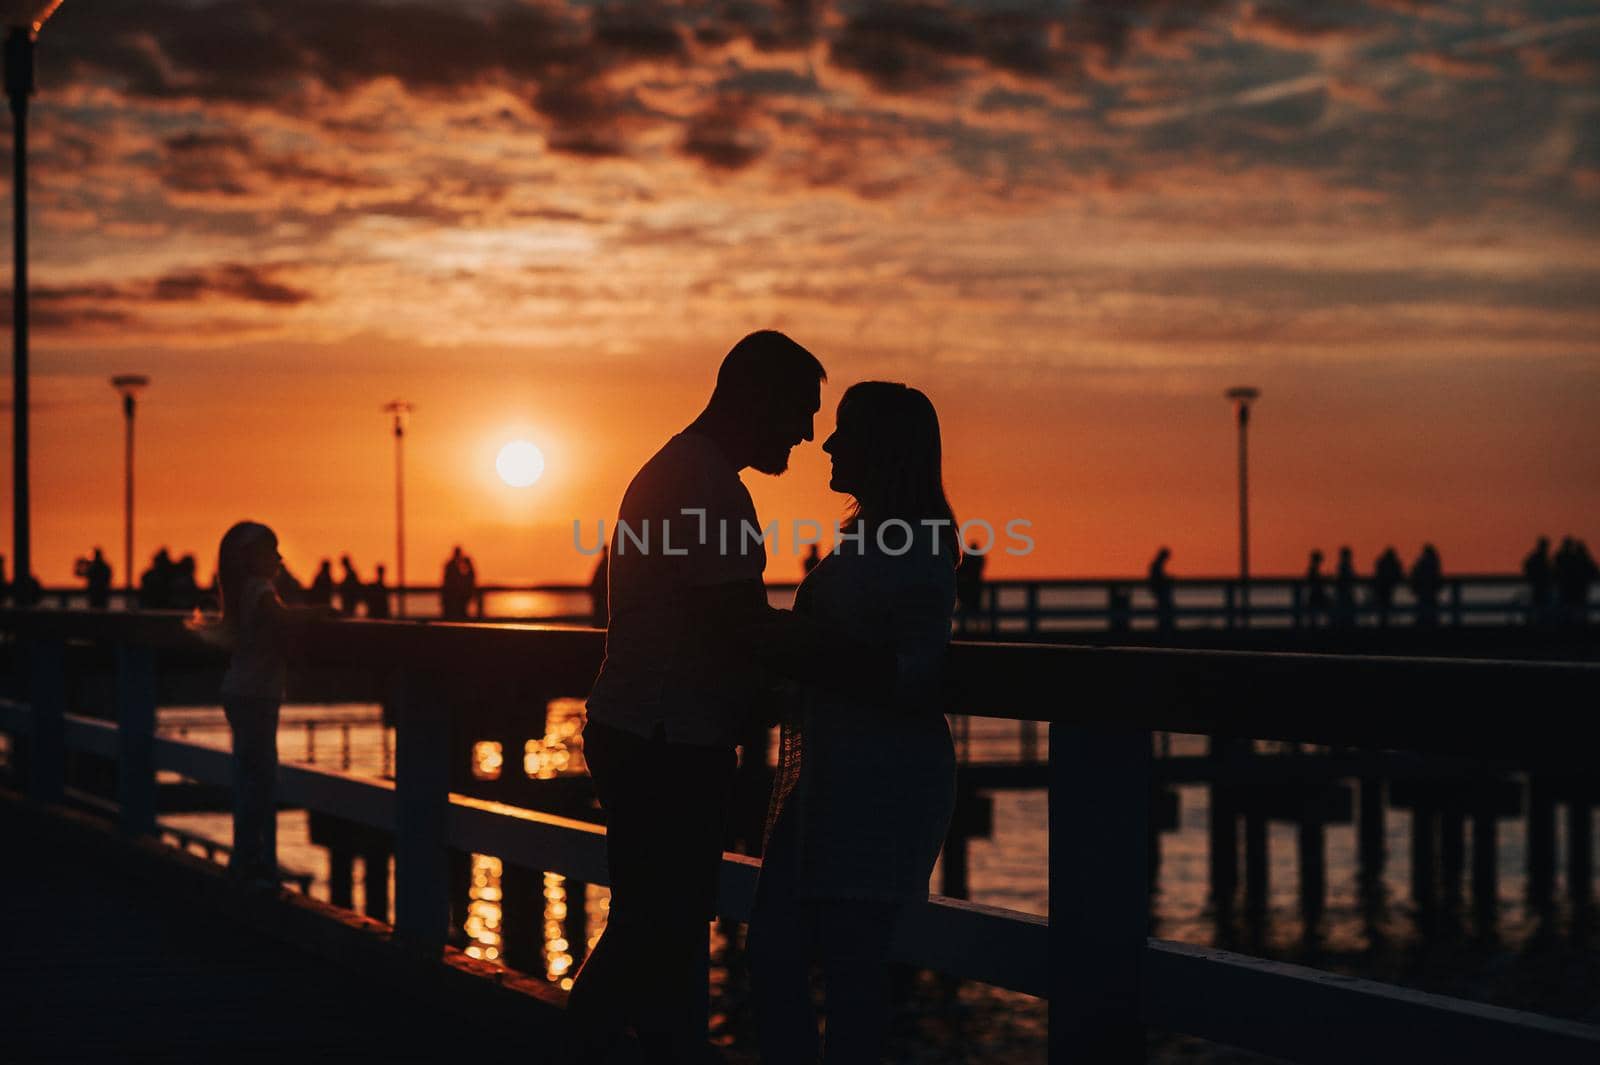 Portrait silhouette of a beautiful newlywed couple. A loving man hugs a girl at sunset, against the background of the sea standing on the pier